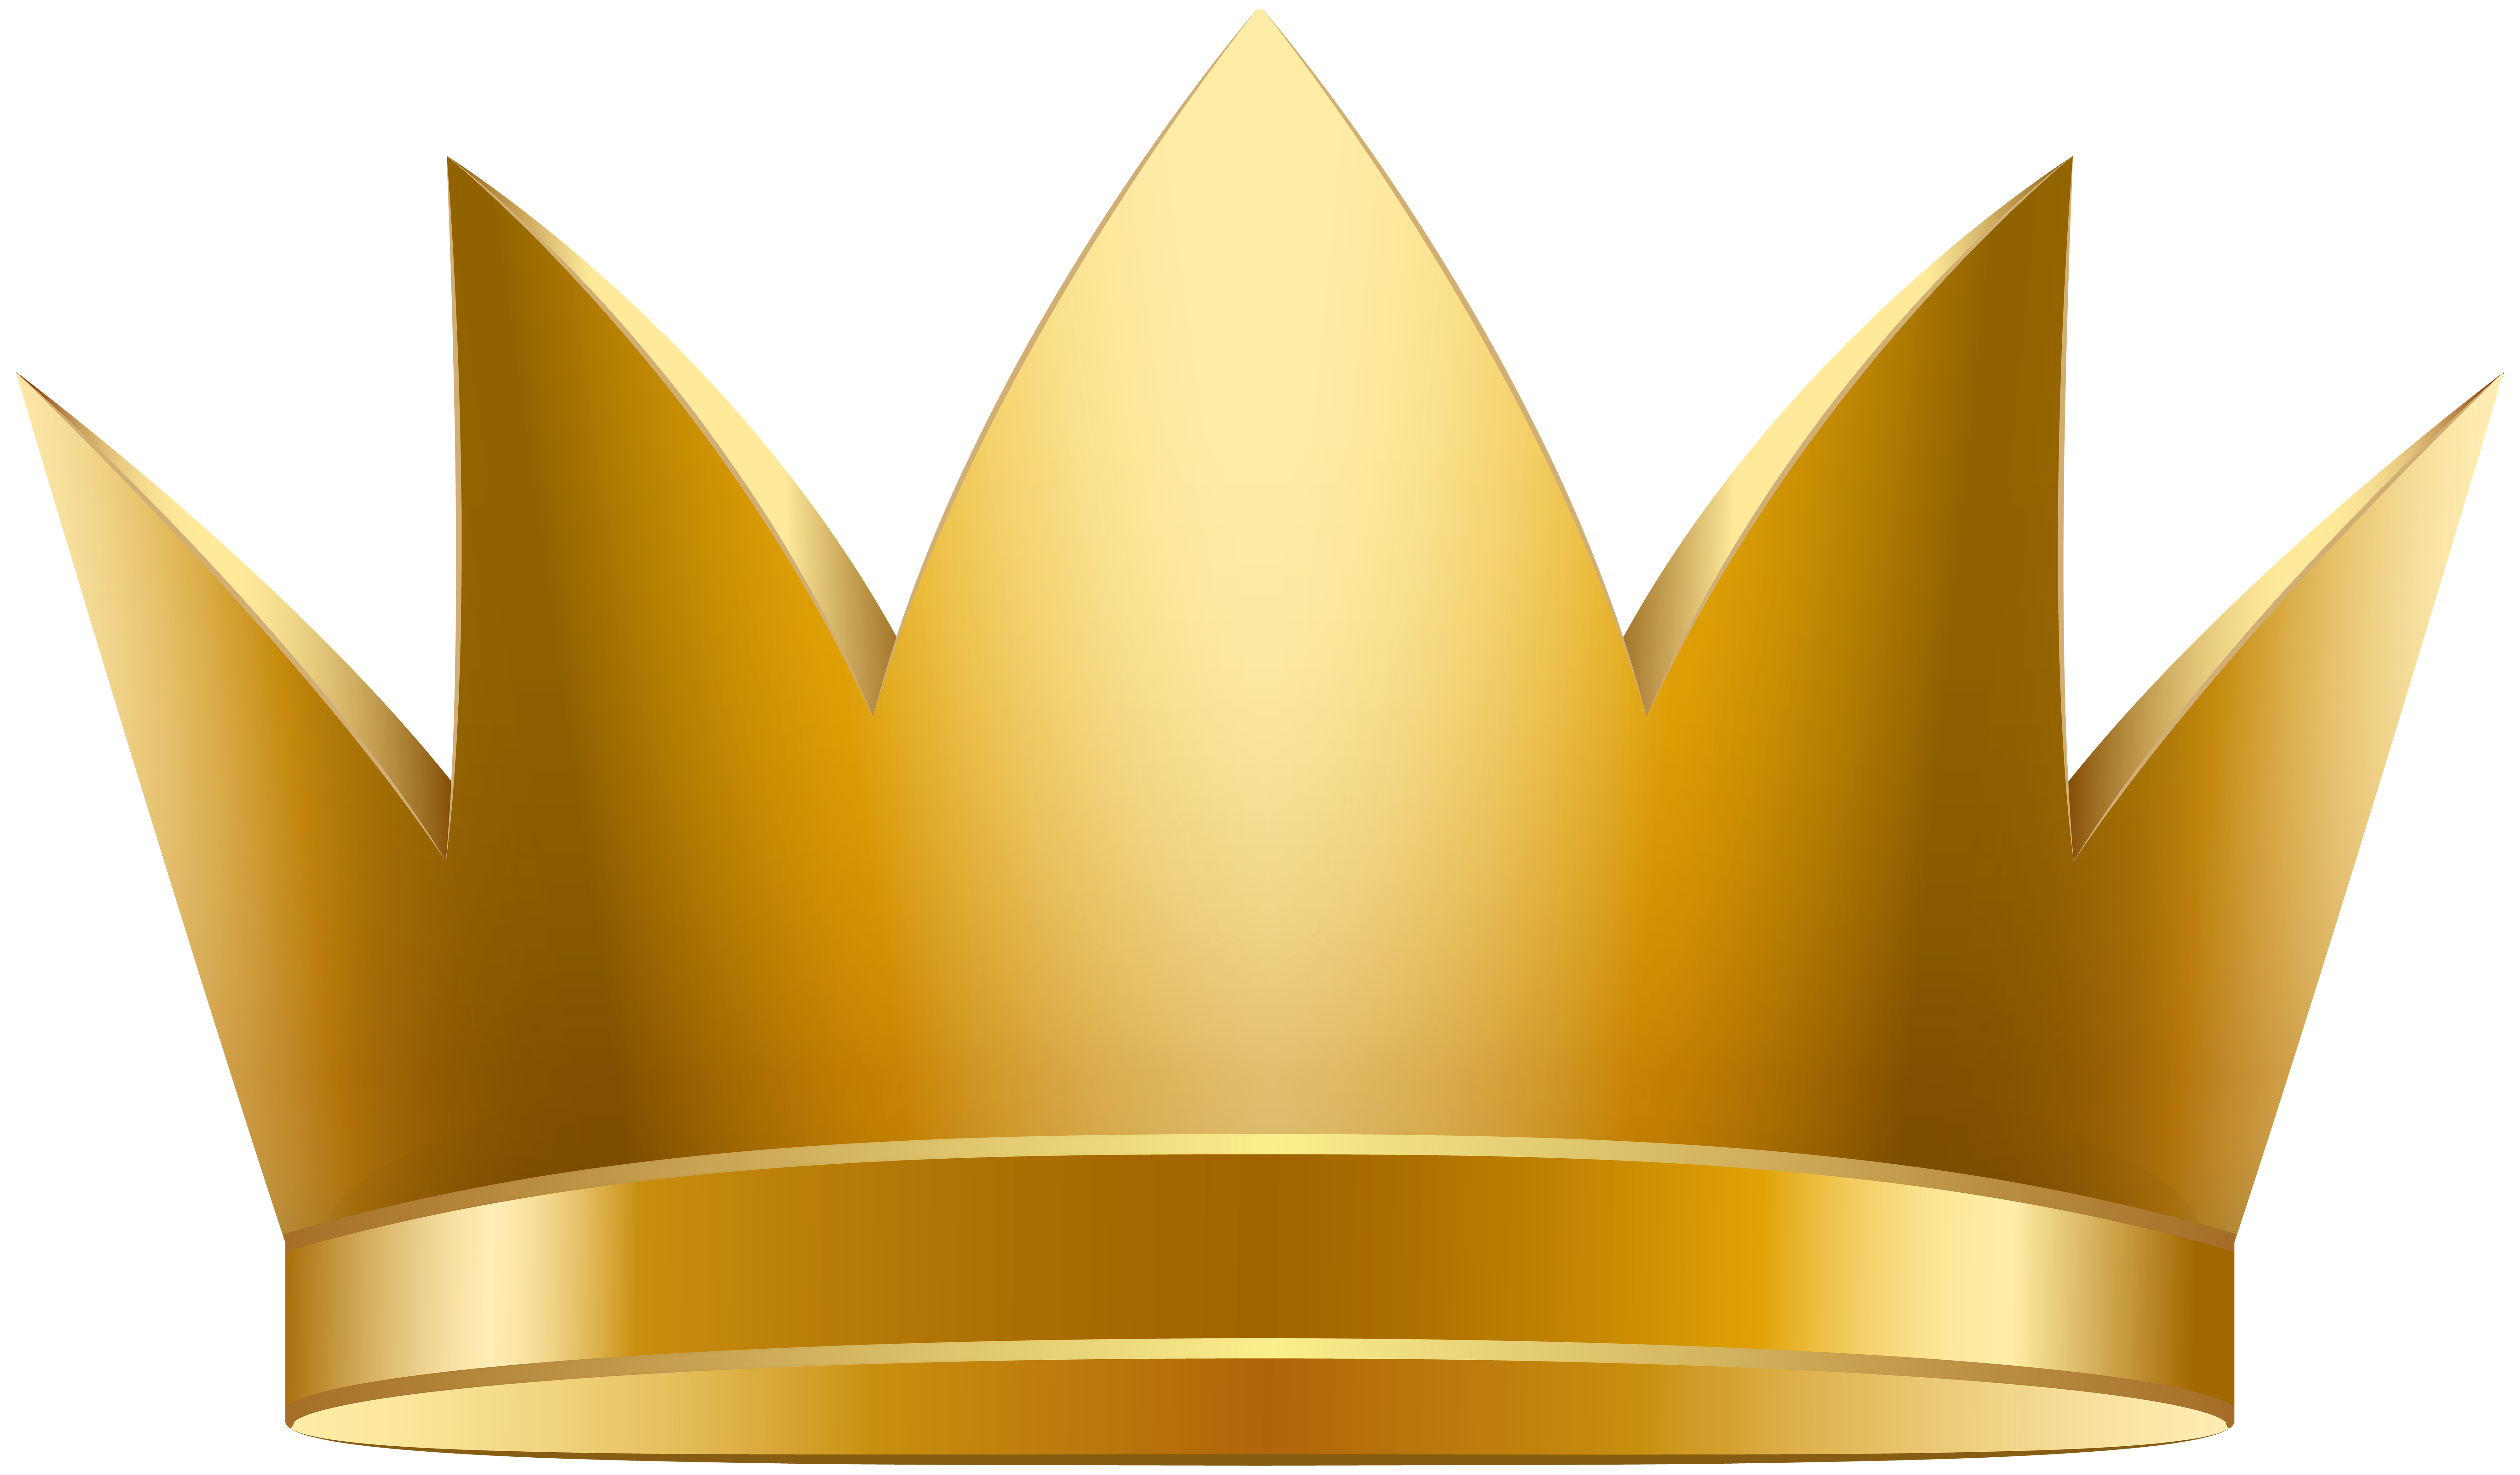 Golden Crown PNG Clip Art Image Quality Image And Transparent PNG Free Clipart